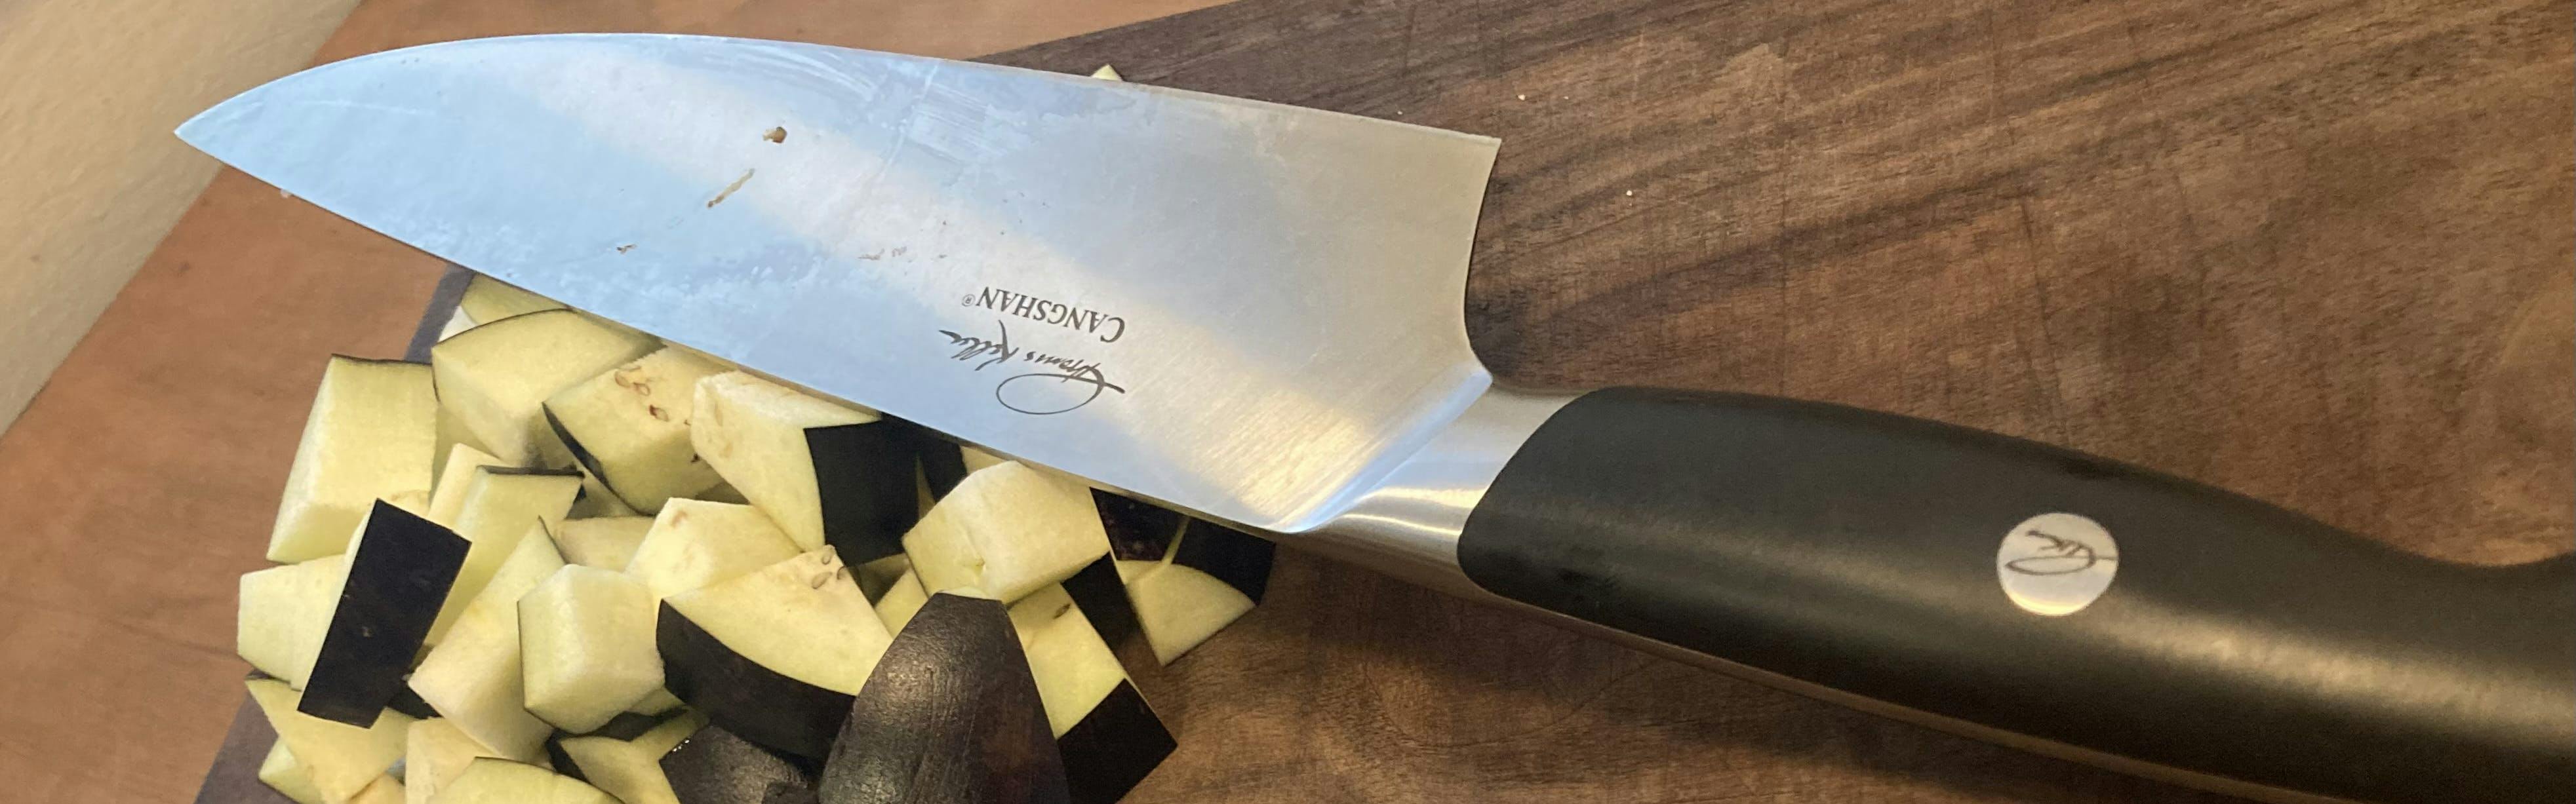 Expert Review: Cangshan Thomas Keller Signature Collection Chef's Knife, 8